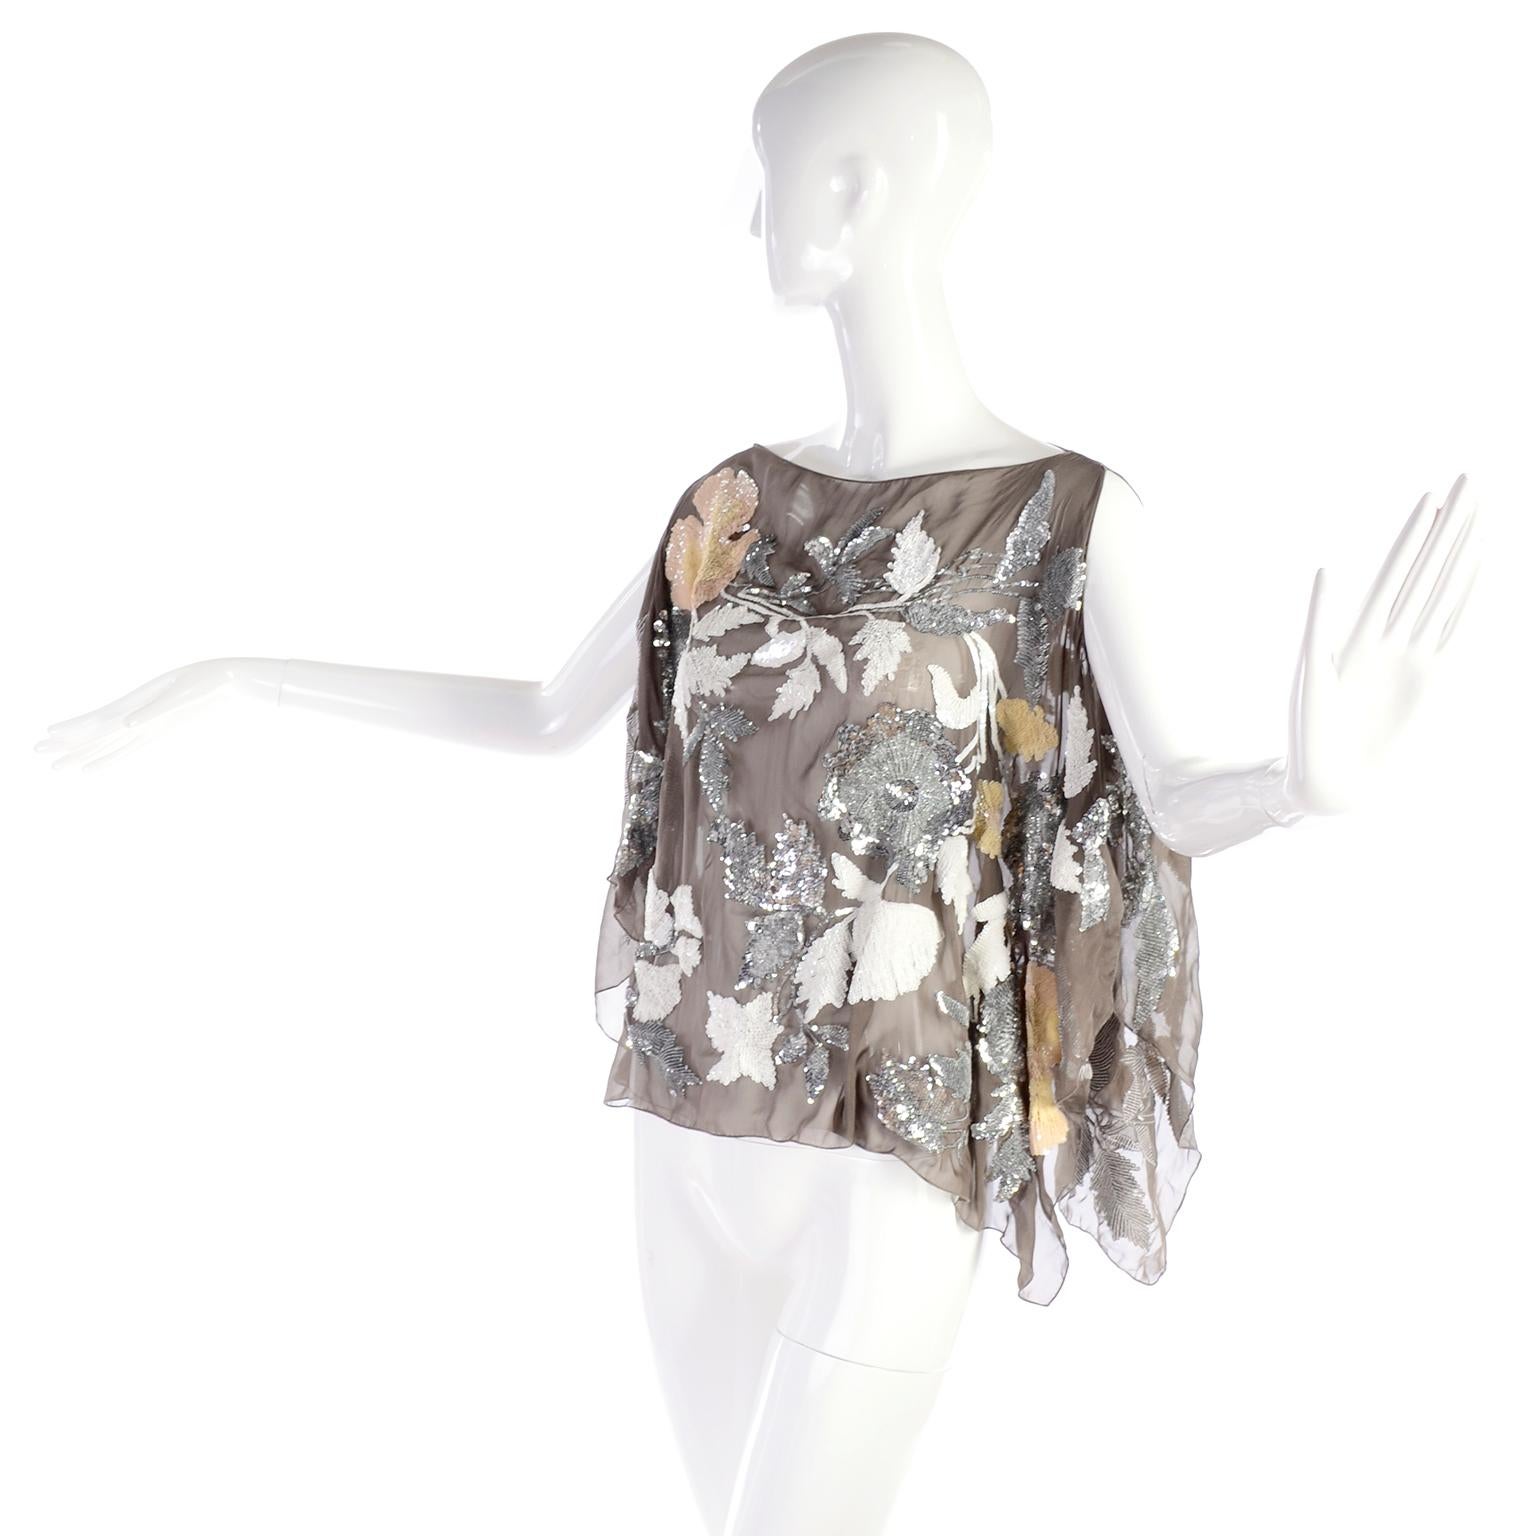 This exquisite sheer fine silk taupe Valentino top is covered in silver metallic and peach and white iridescent sequins. This elegant piece can be worn over a tank or just with a pretty bra. You can wear it with an evening skirt, evening trousers,